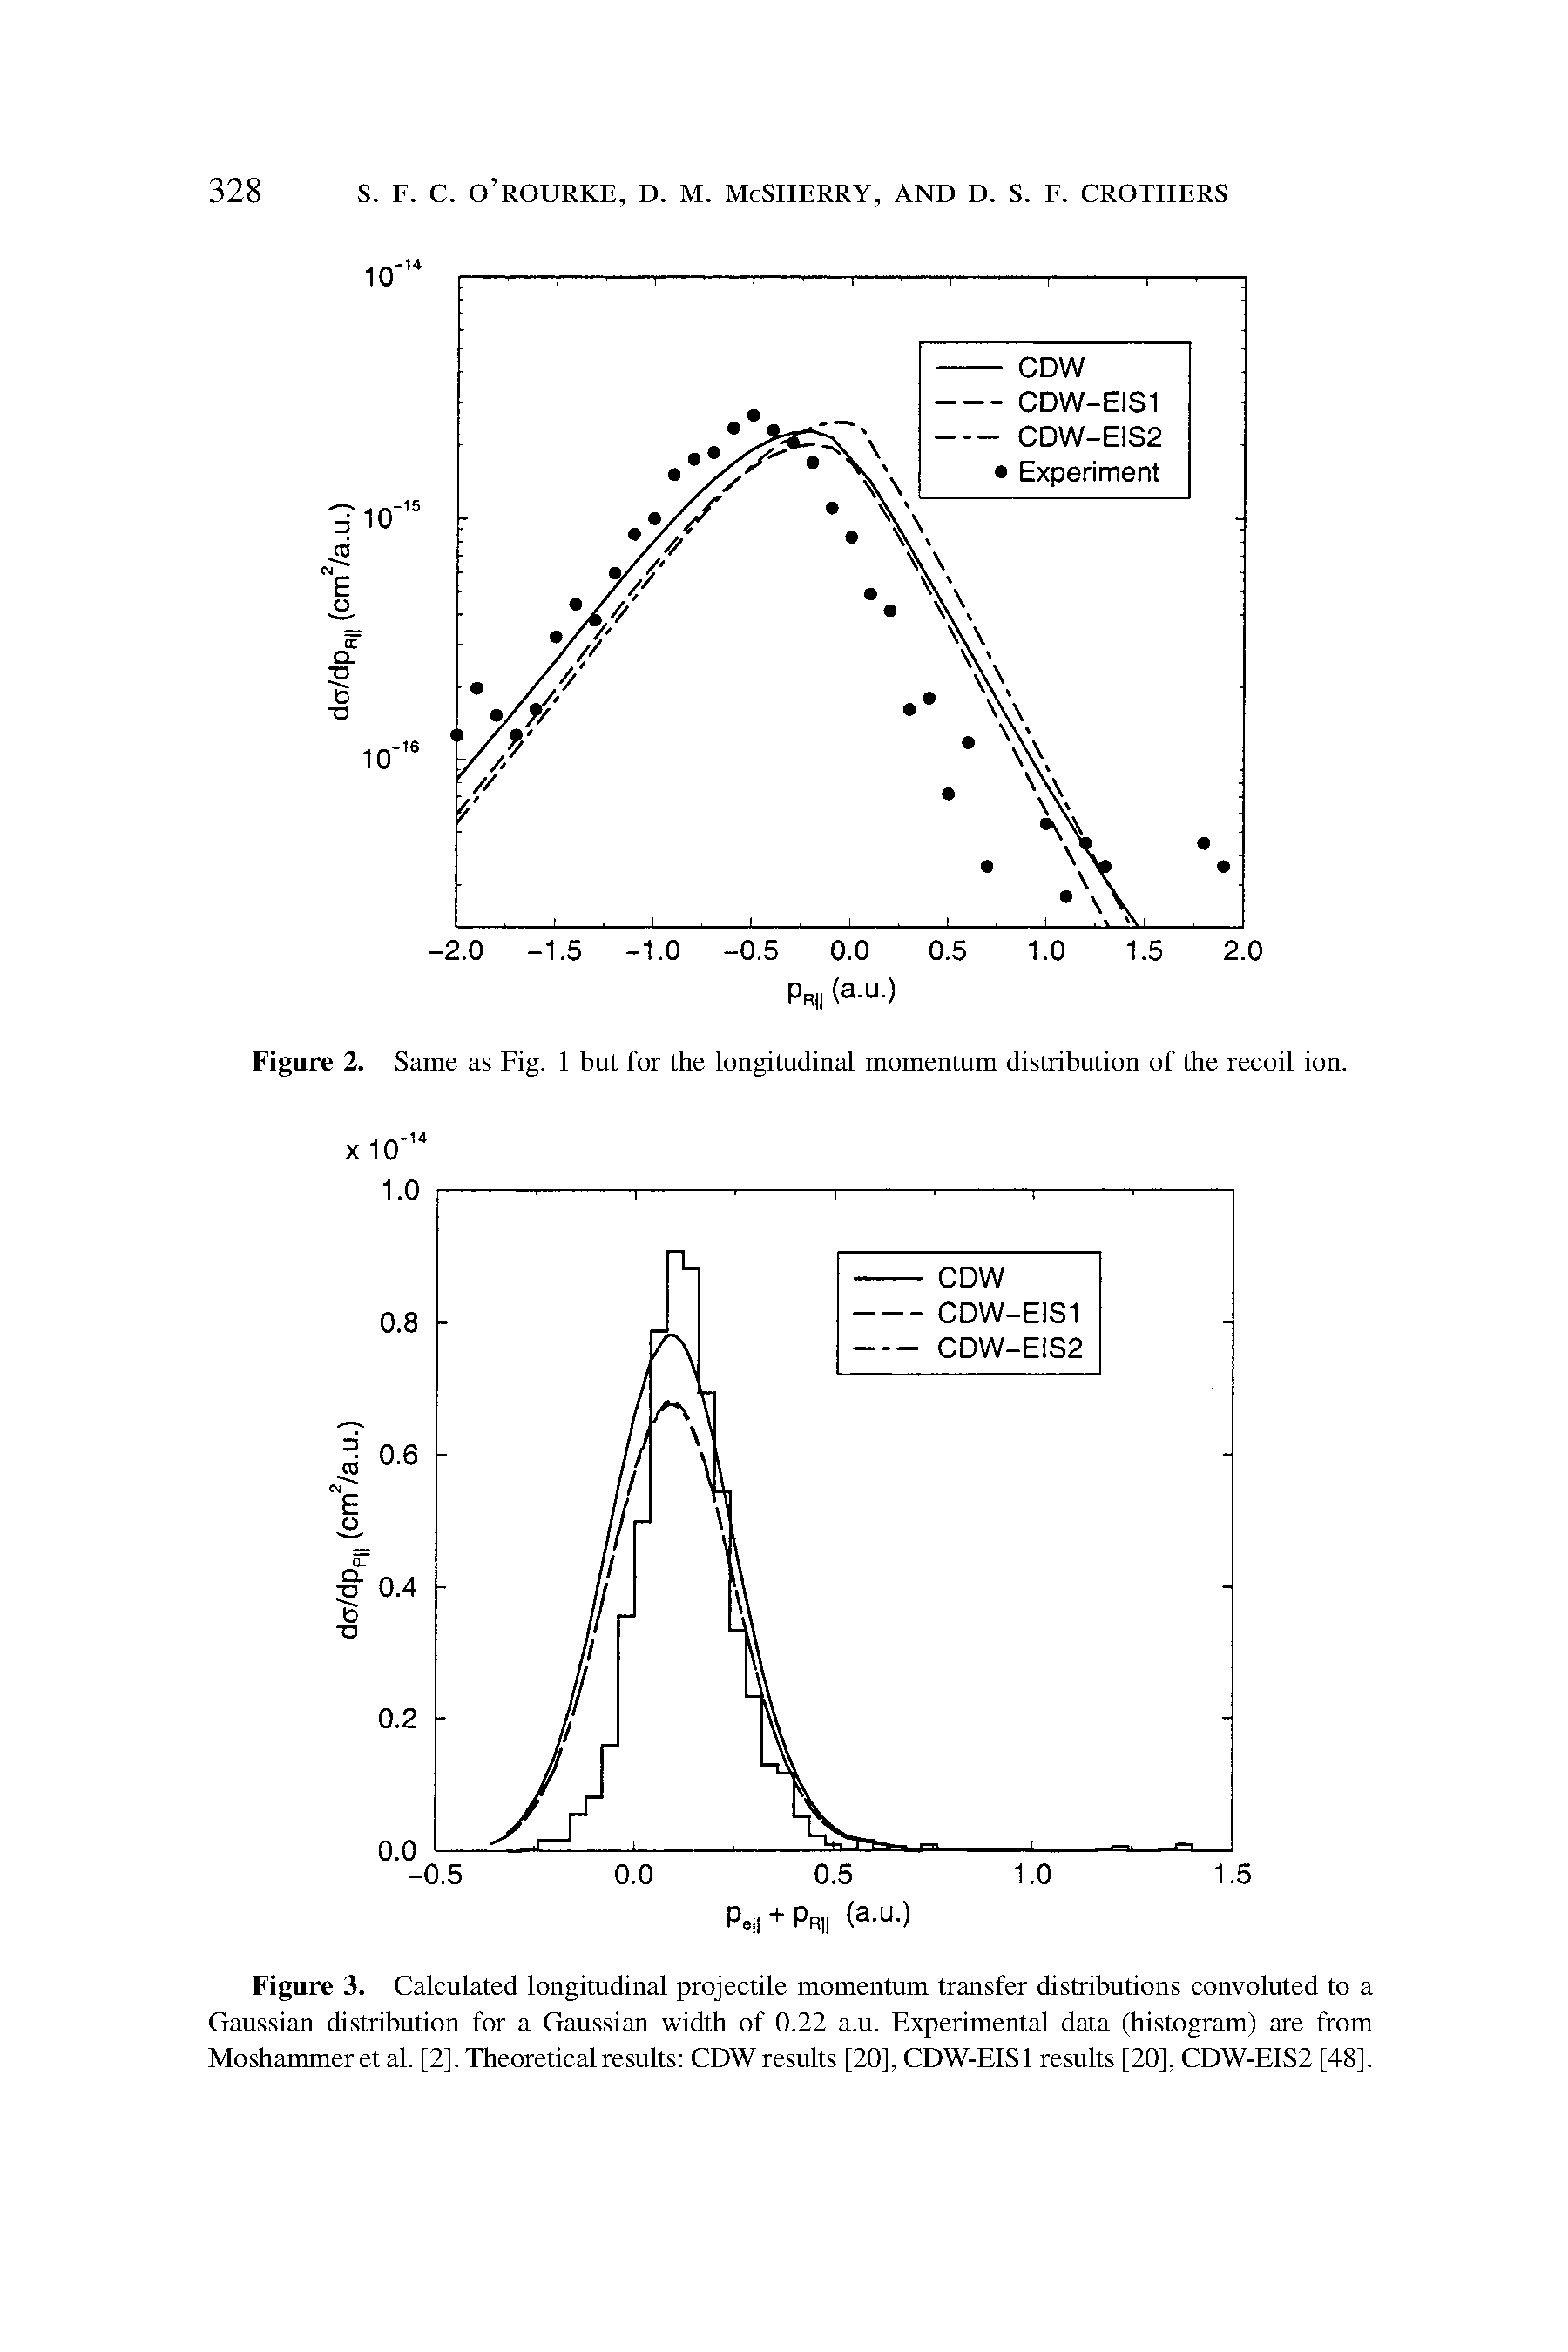 Figure 3. Calculated longitudinal projectile momentum transfer distributions convoluted to a Gaussian distribution for a Gaussian width of 0.22 a.u. Experimental data (histogram) are from Moshammeret al. [2], Theoretical results CDW results [20], CDW-EIS1 results [20], CDW-EIS2 [48],...